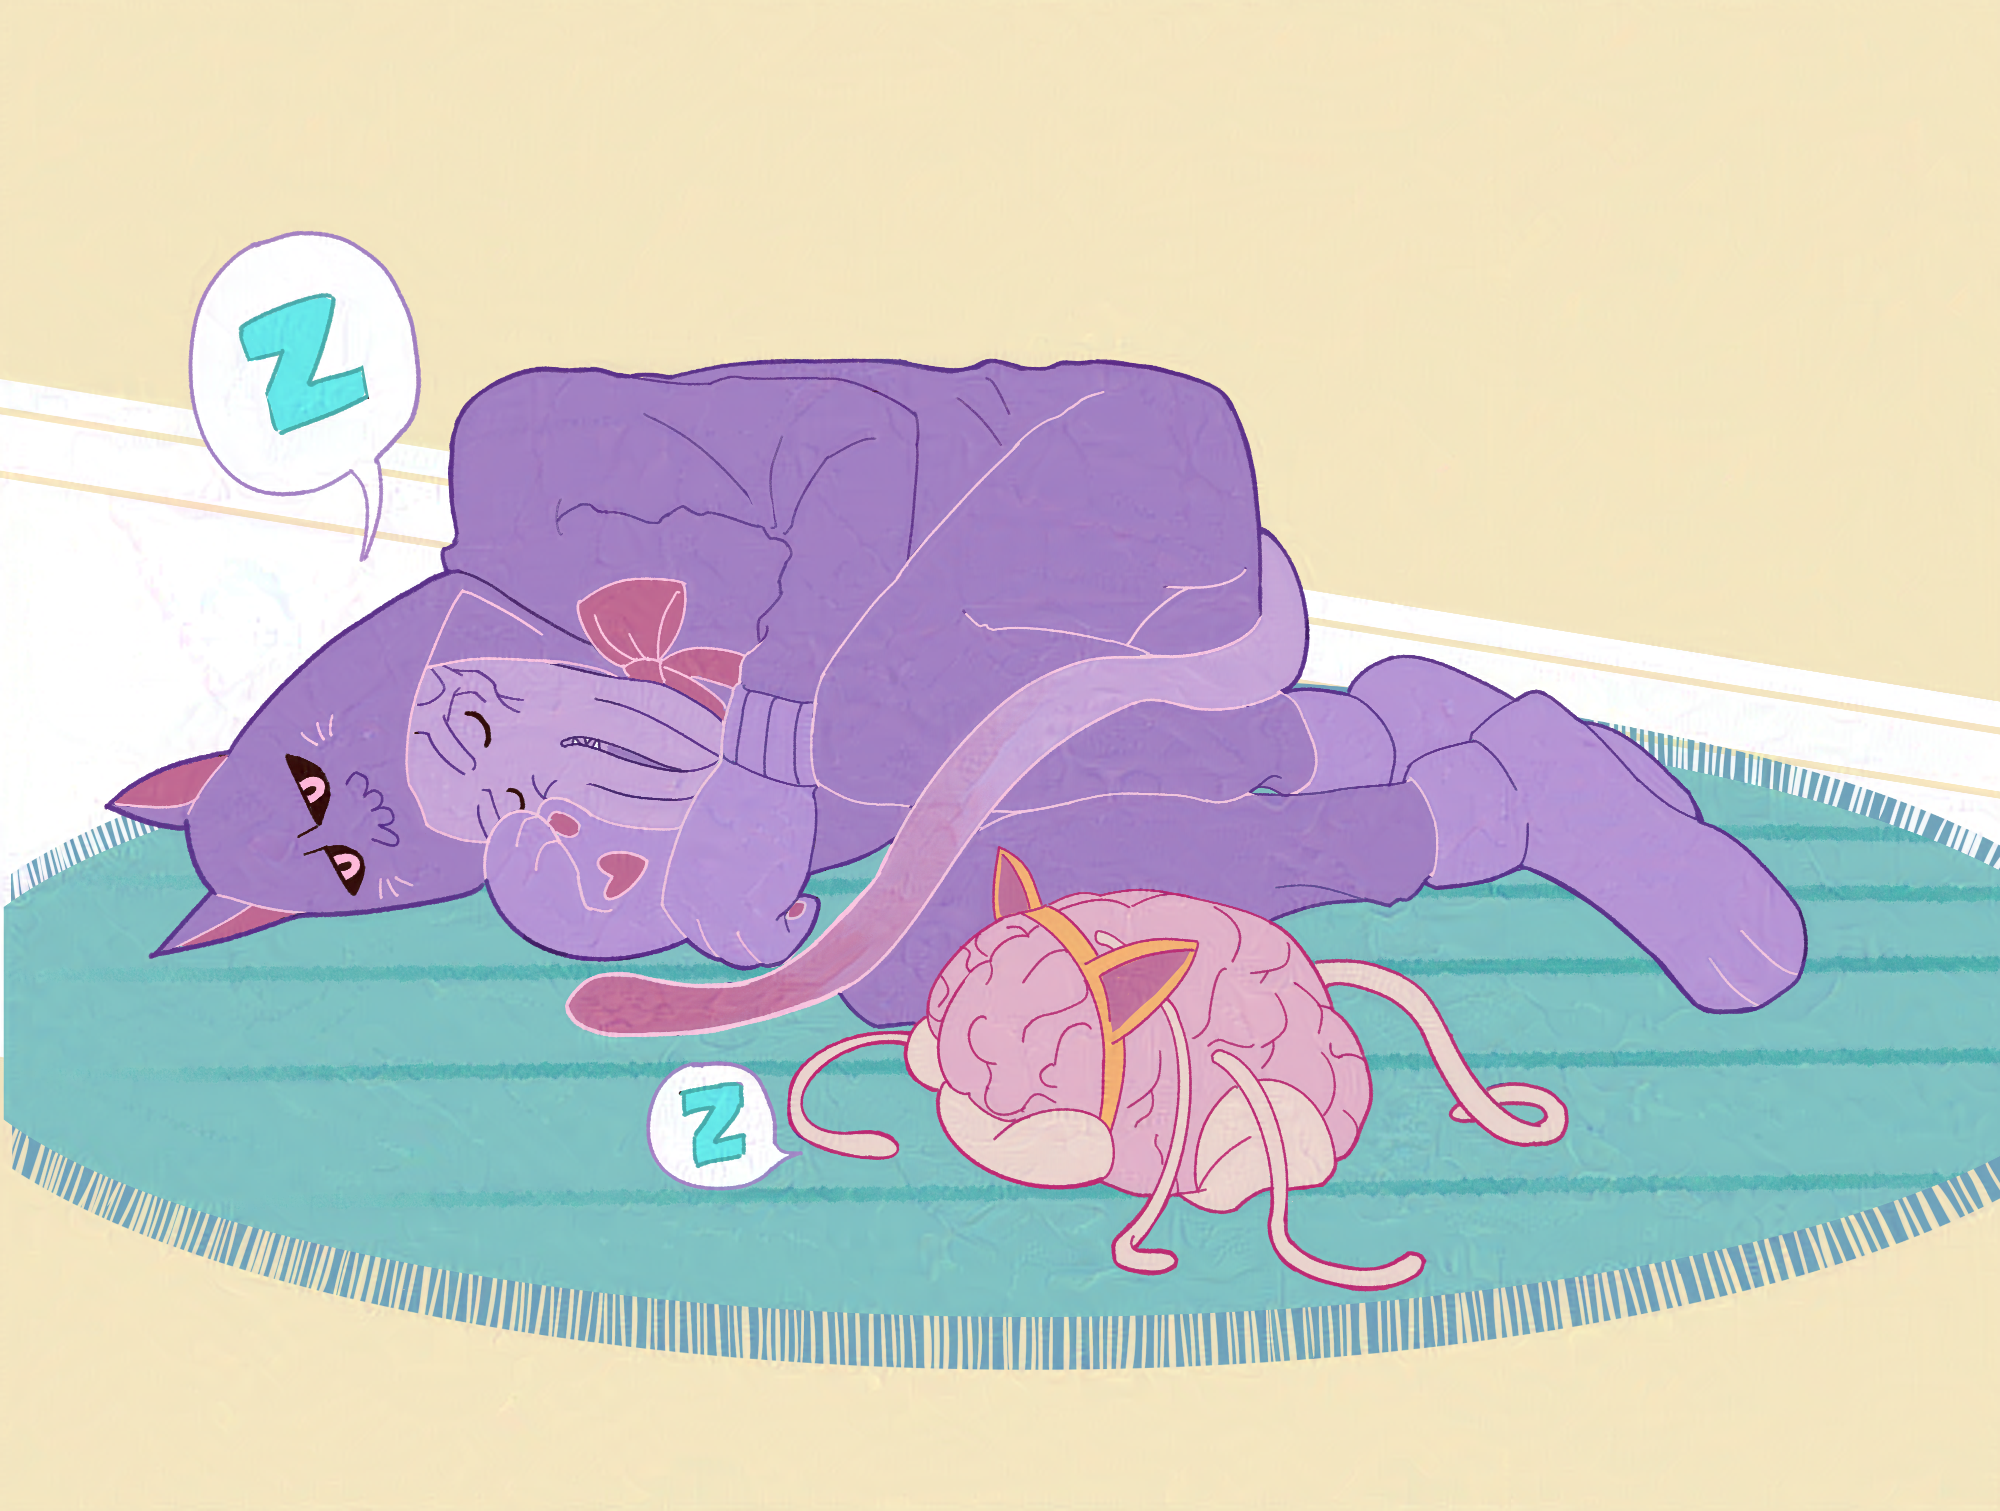 The Emperor is in a cute purple cat pajama oufit, curled up on a blue rug sleeping. It also has a tentacle tail that's curled up around it. Us (the intellect devourer) is wearing an orange cat headband and is also sleeping next to the Emperor.